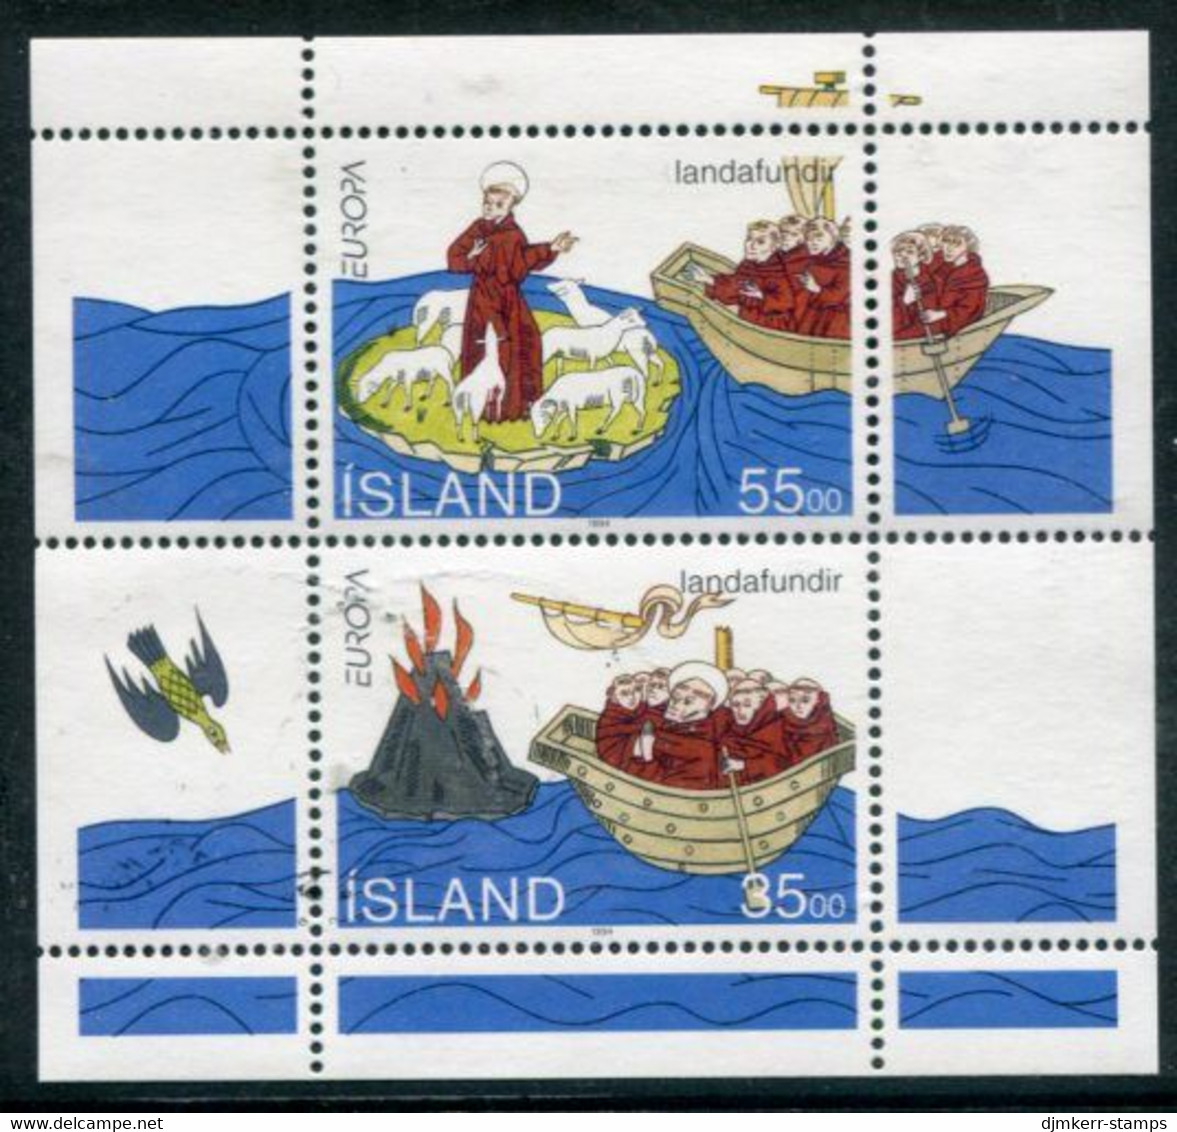 ICELAND 1994 Europa: Discover Of Iceland Block  MNH / **  Michel Block 15 - Neufs